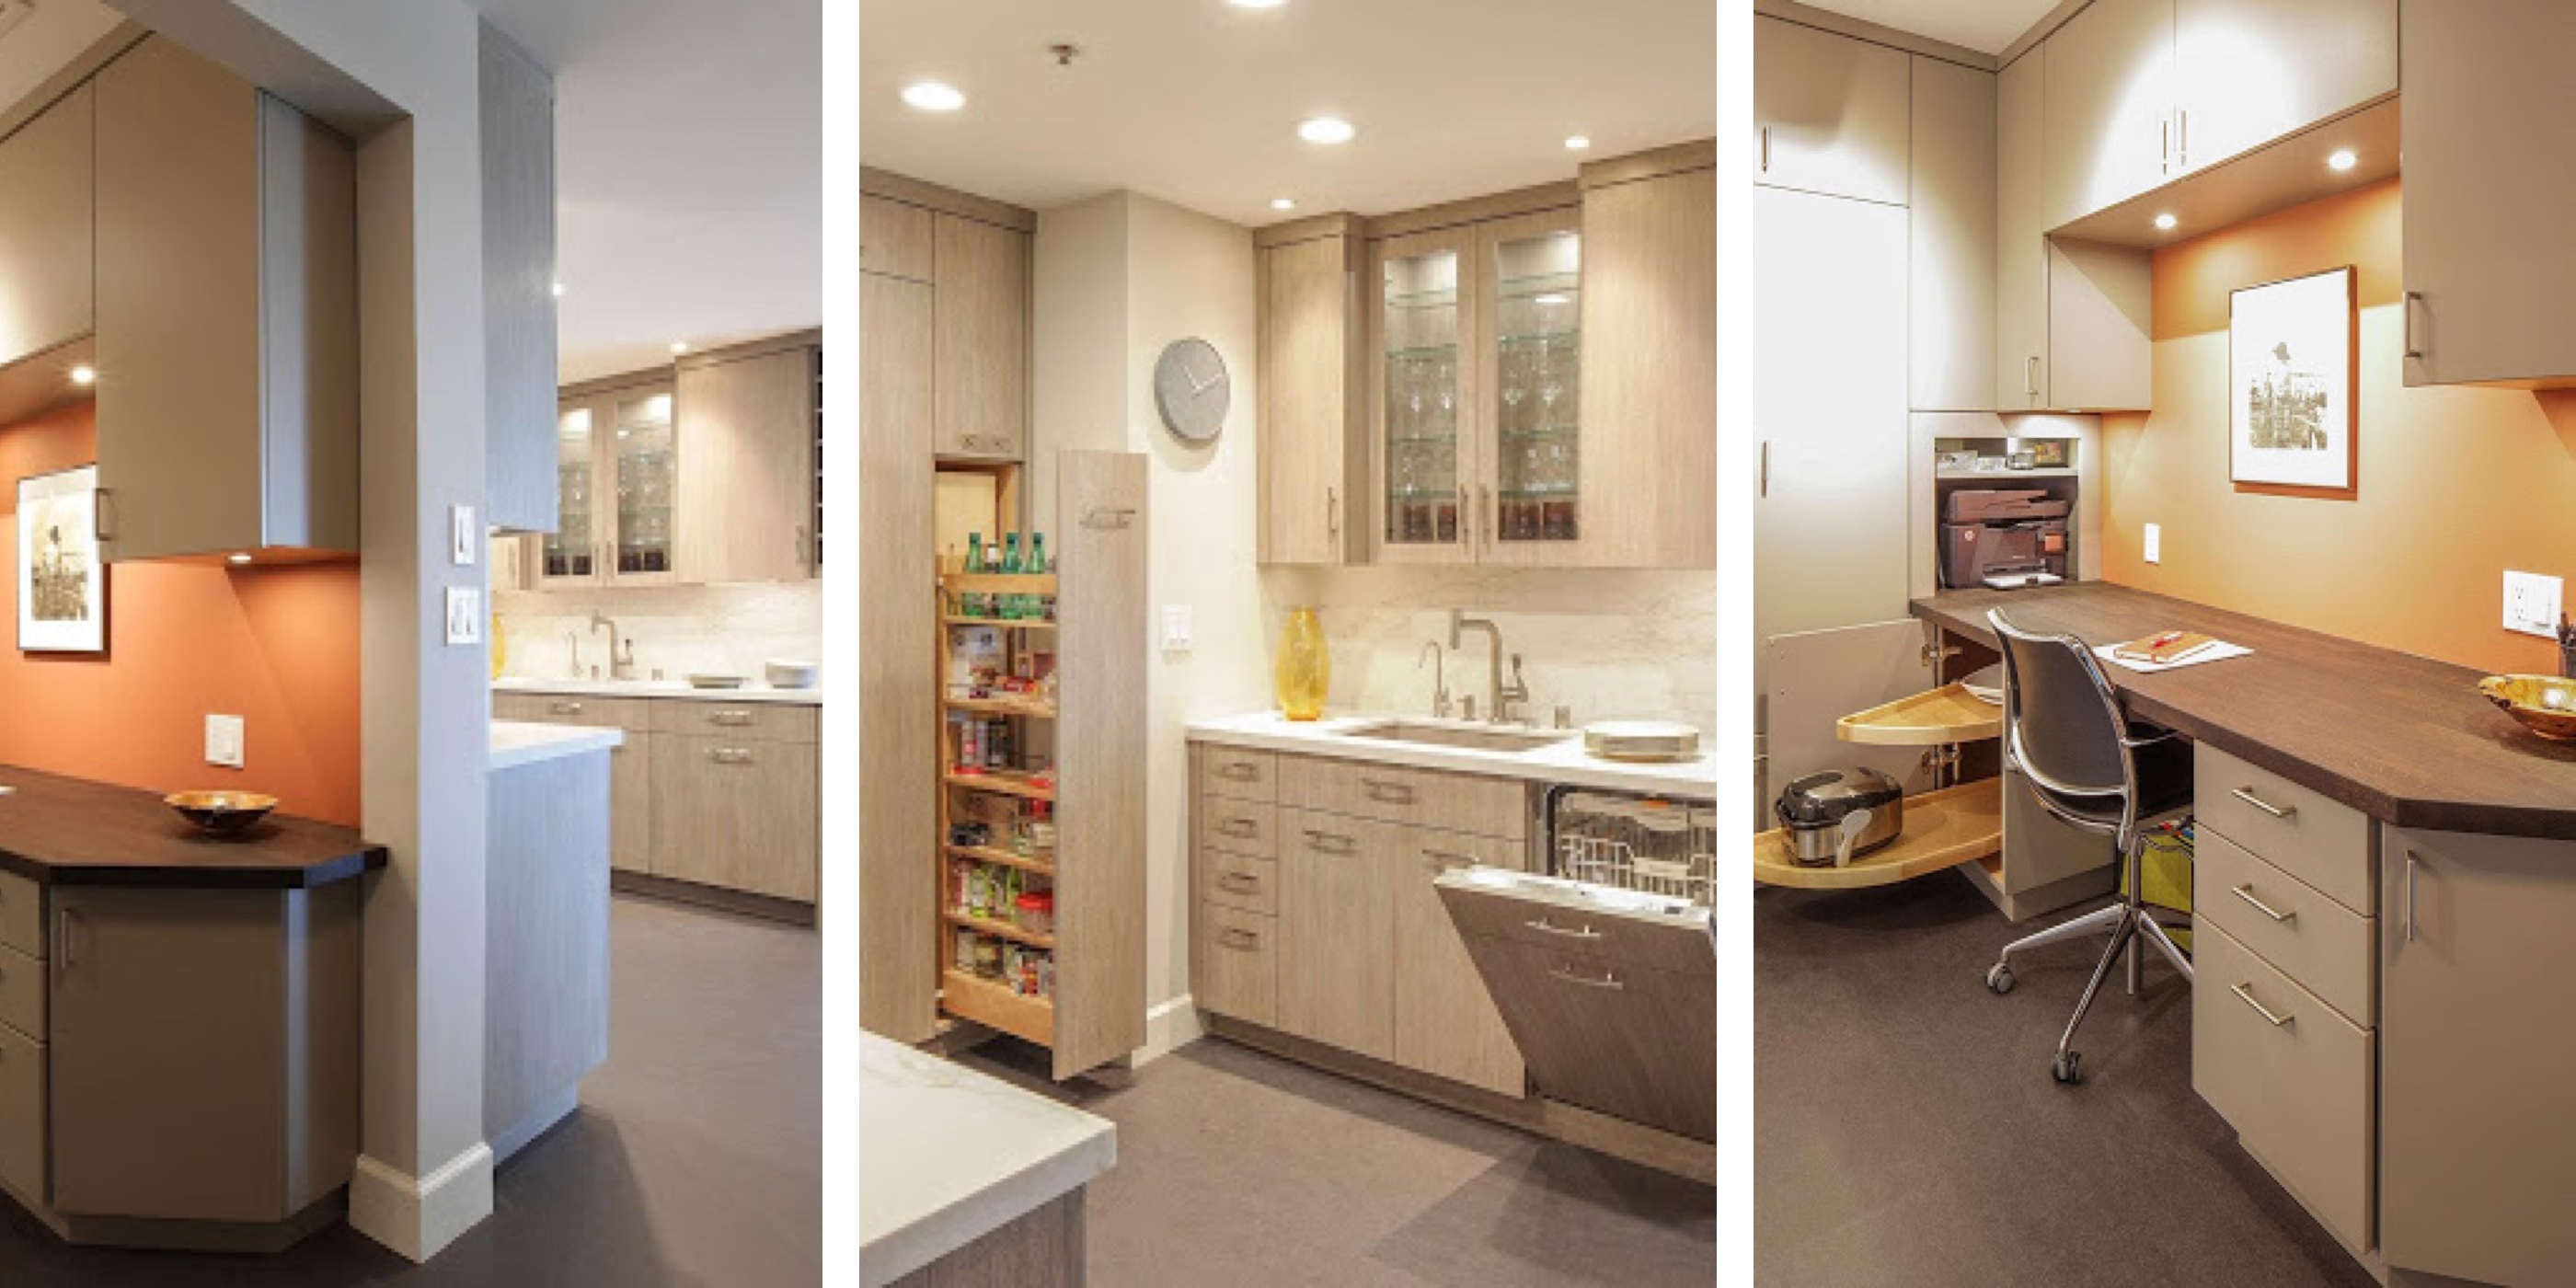 Condo Makeover Our Favorite Luxury Condo Renovations in the East Bay - Custom Cabinetry - Office Space - Custom Kitchens